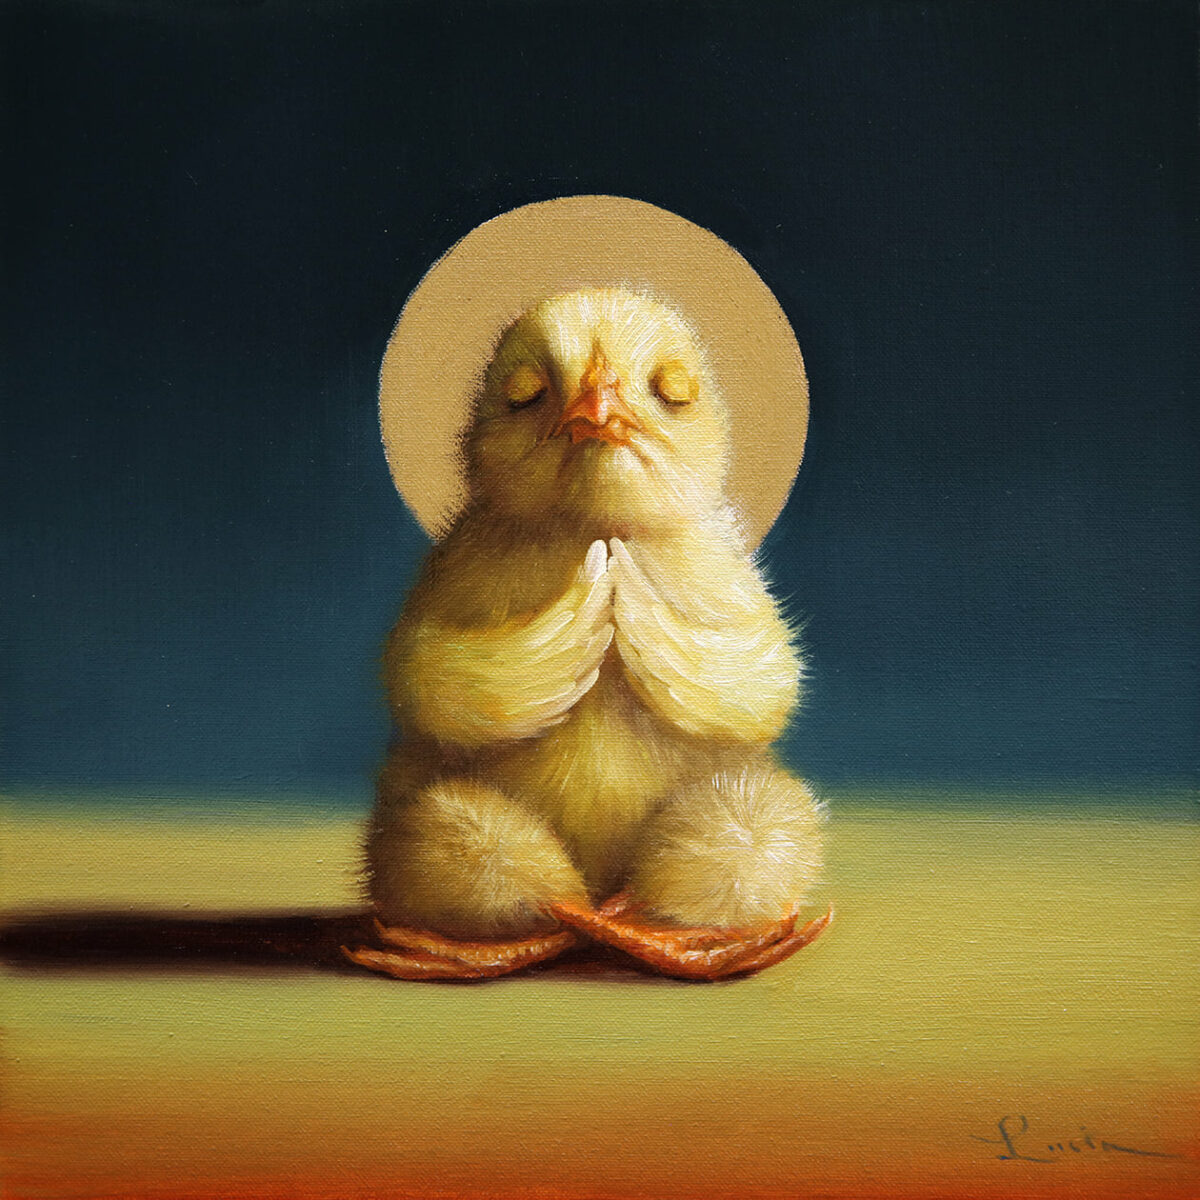 Lovely Paintings Of A Little Chicken Making Yoga Poses By Lucia Heffernan 11